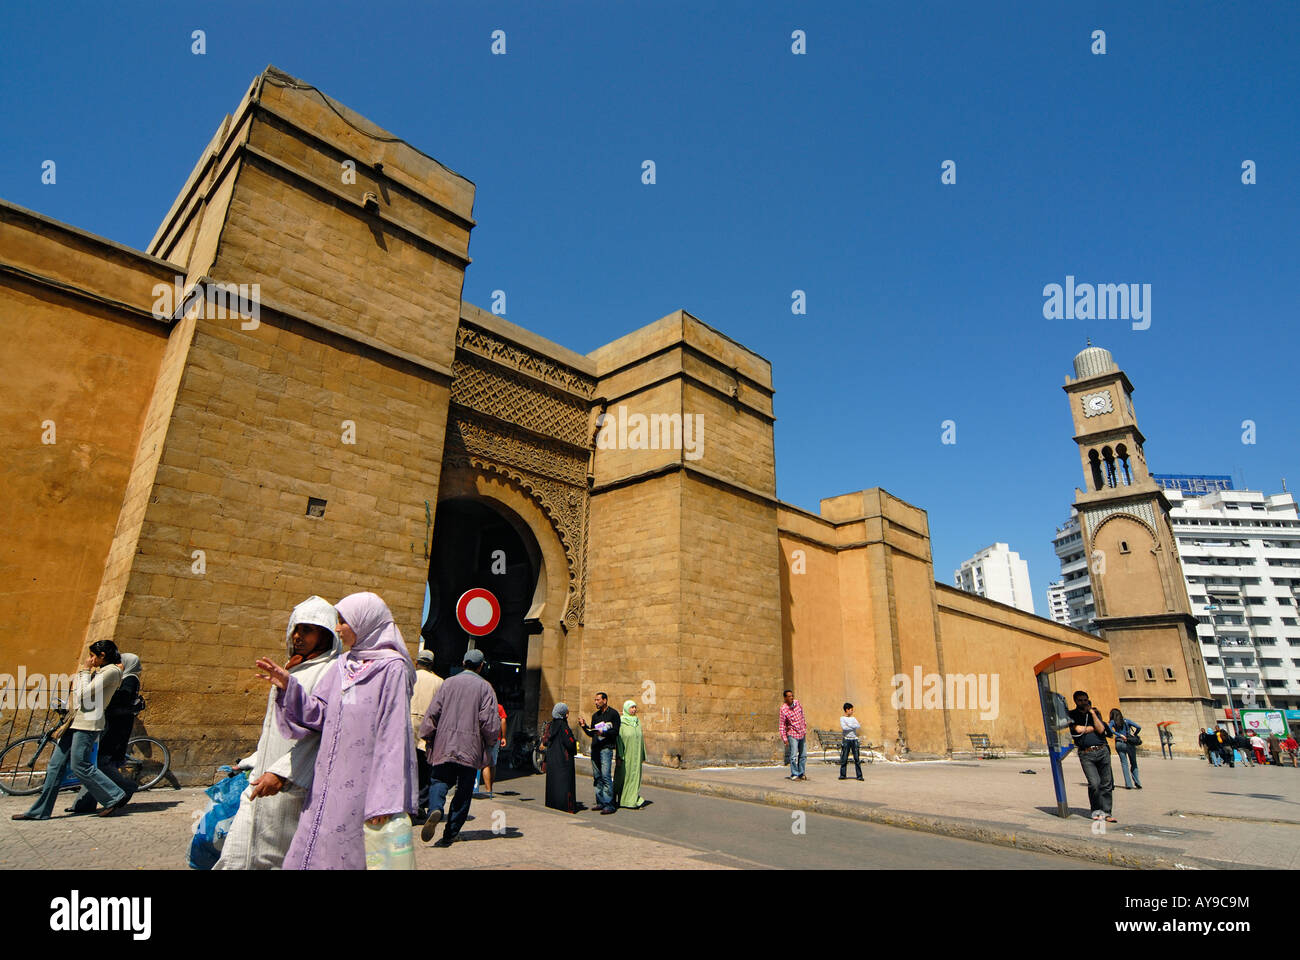 City Walls and Clock-Tower at Place des Nations Unies in Central Casablanca, Morocco Stock Photo